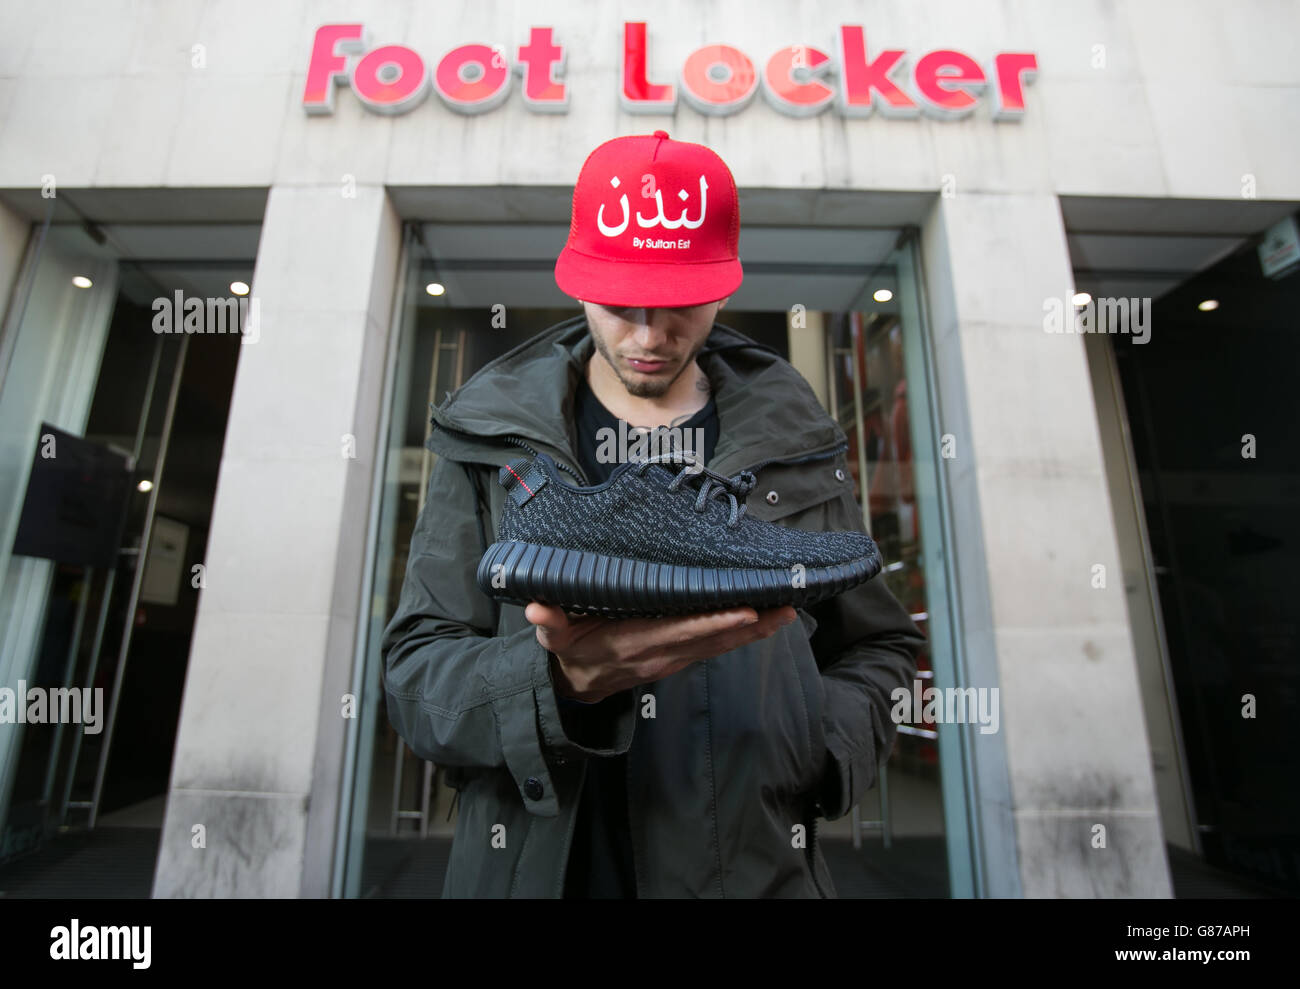 Sultan Est, 23 outside Foot Locker in Oxford Street, London, with his new pair of limited addition Adidas Yeezy Boost 350 trainers, designed by musician Kanye West. Stock Photo